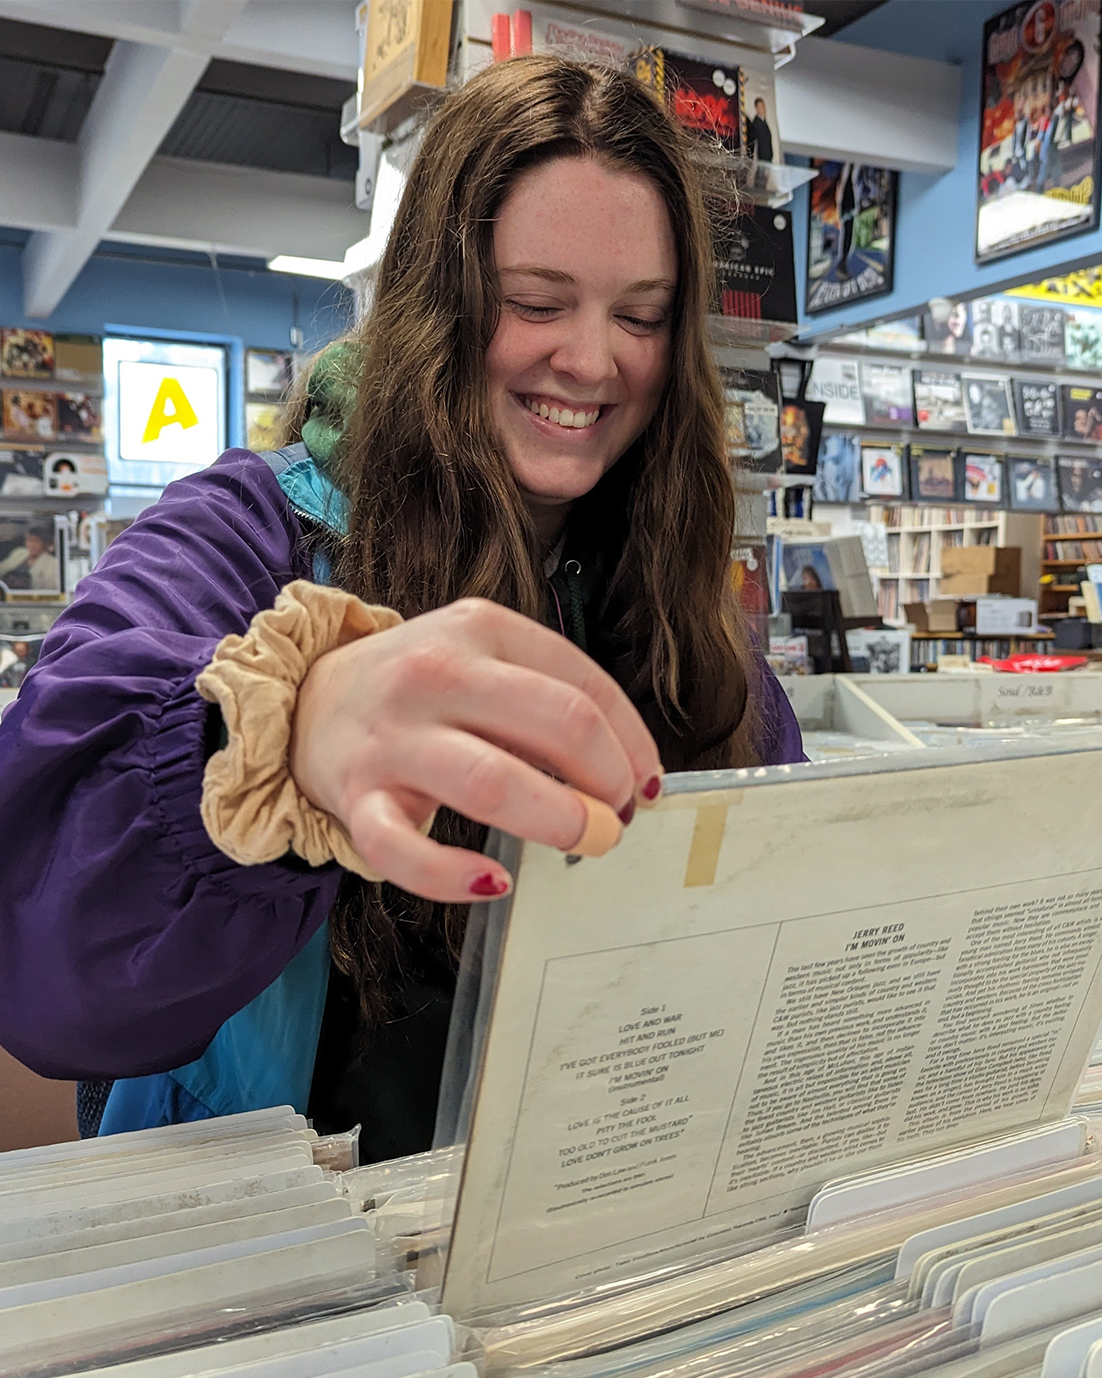 Jaime Hepditch flips through records at Taz Records on Grafton Street in Halifax. She's wearing a purple and blue jacket while smiling as she pulls up a record to read the album cover.